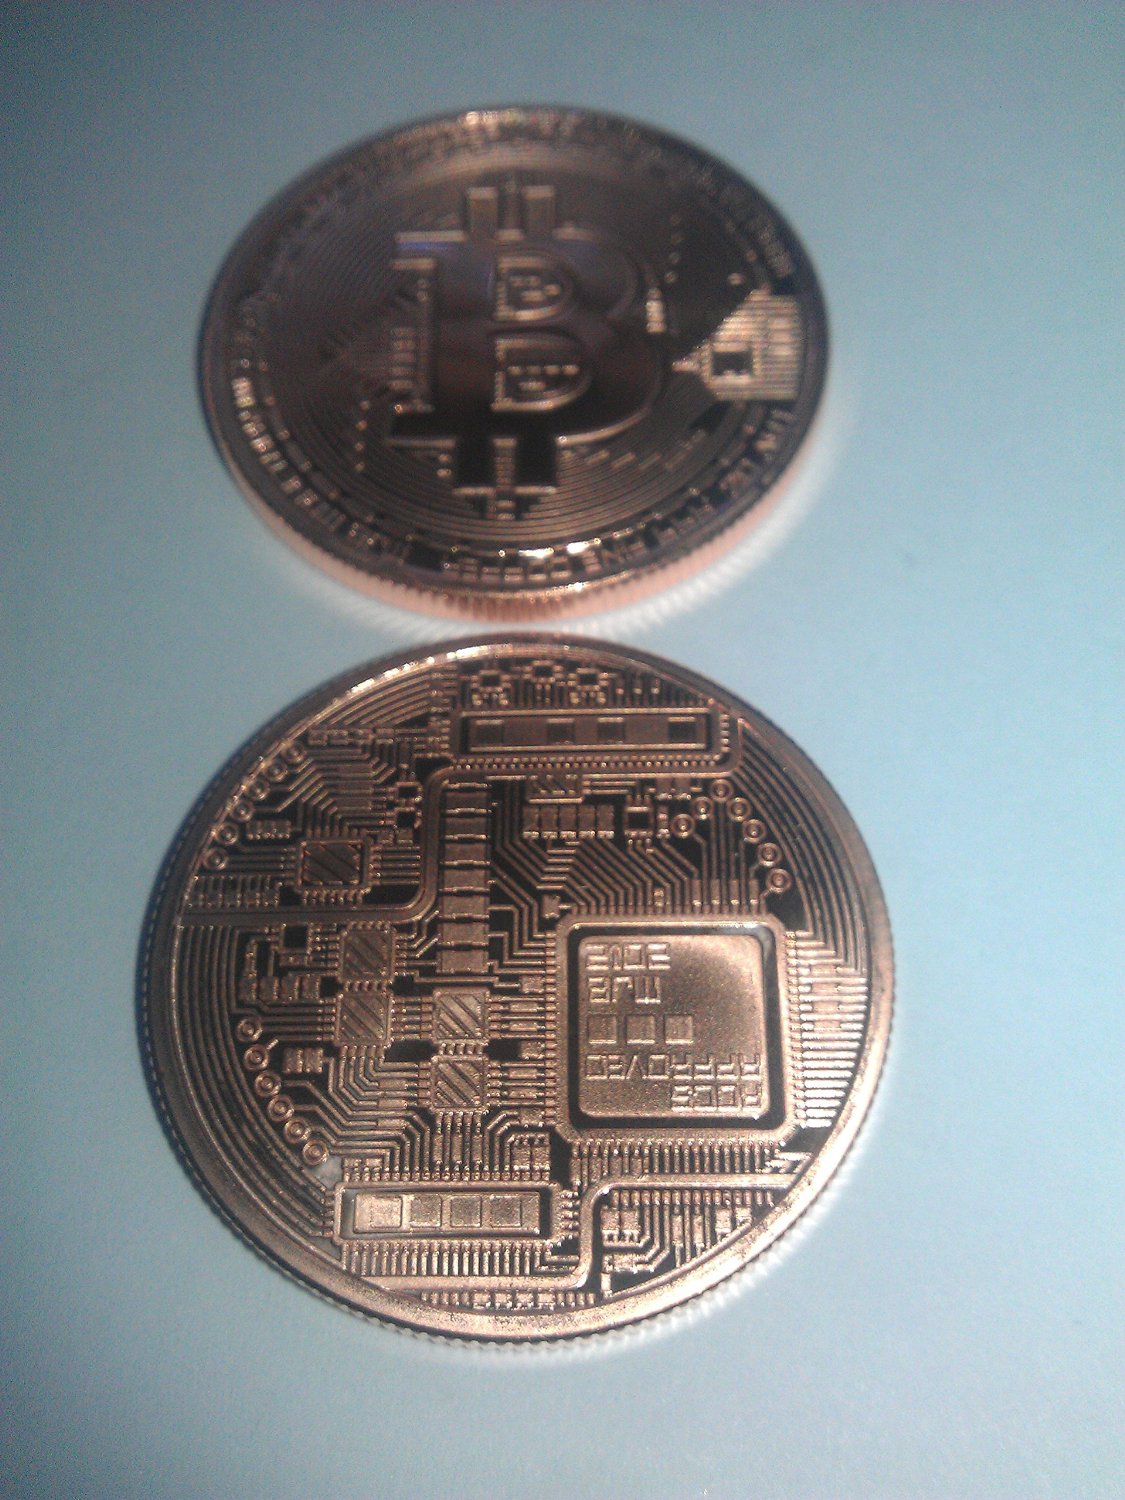 Are bitcoins physical coins - are bitcoins physical coins your search query Global Downloads on ...